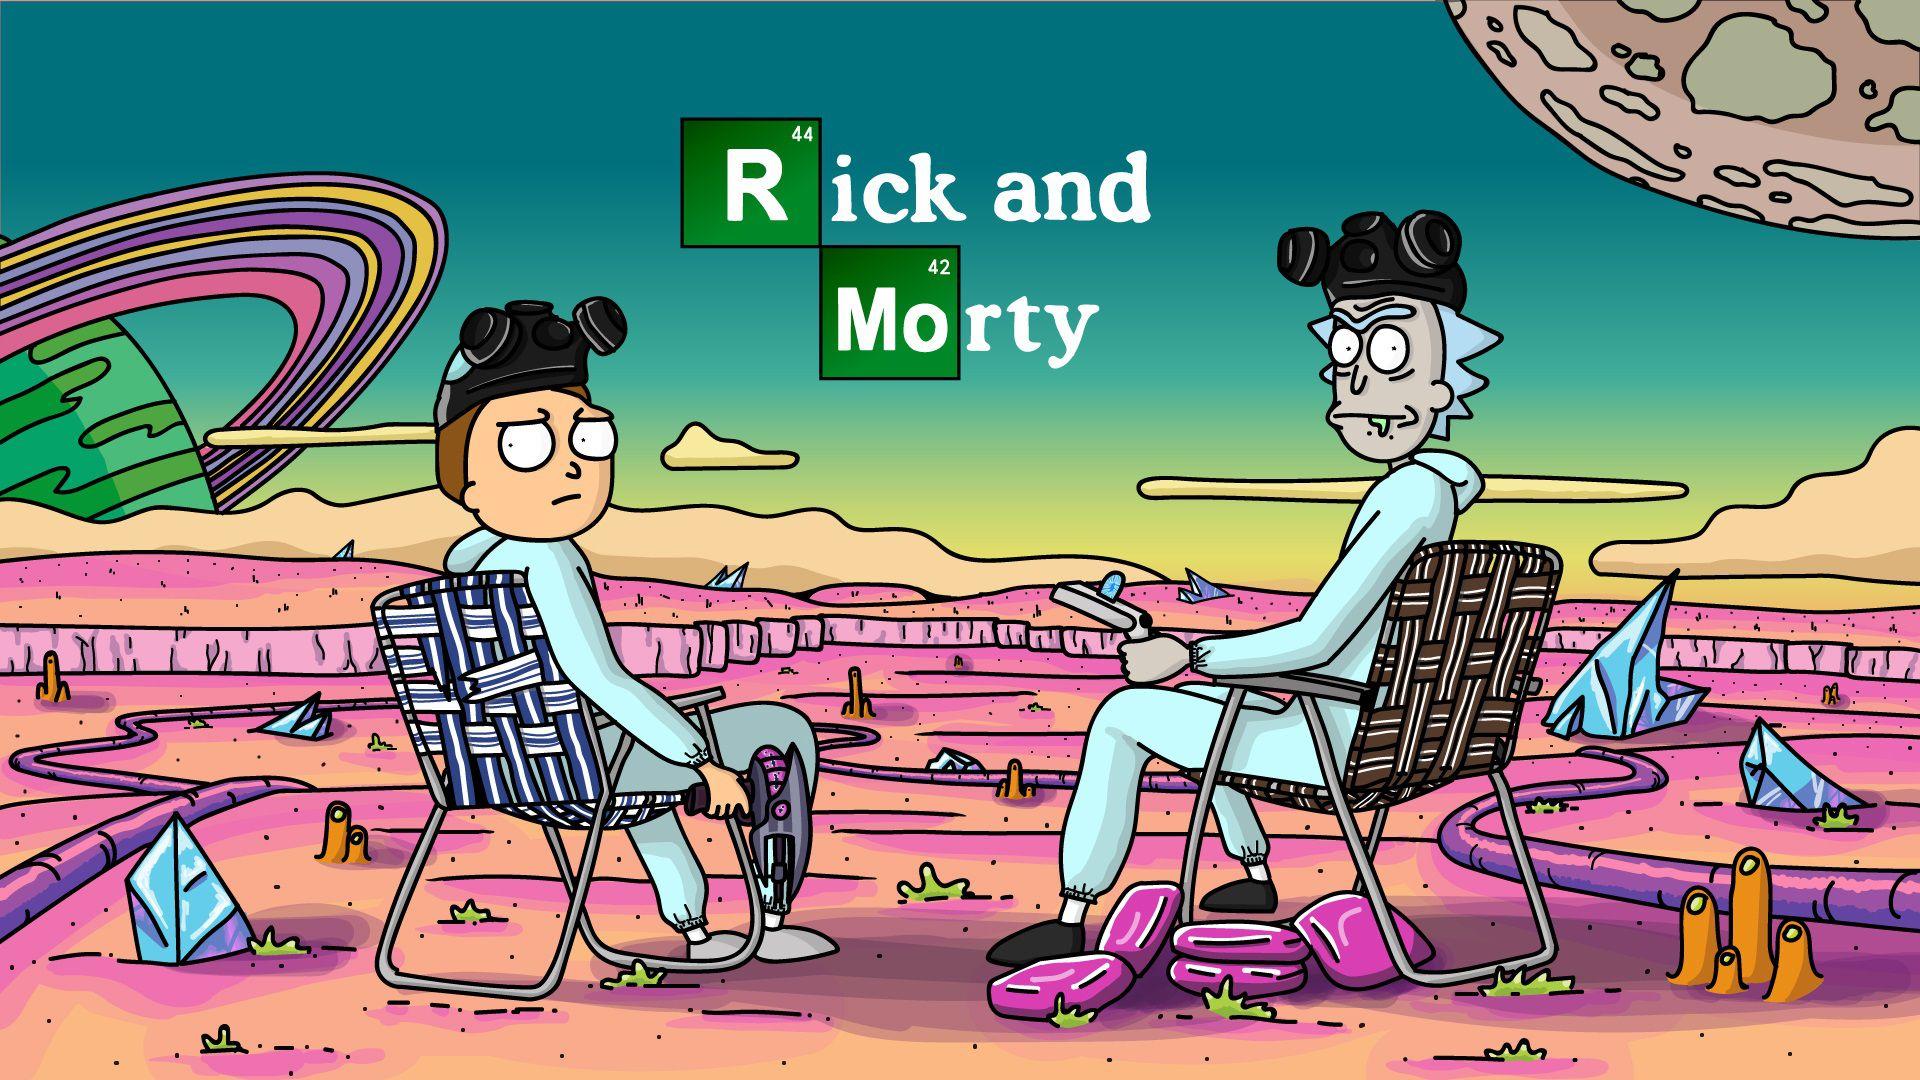 Rick And Morty Season 4 Official Announcement, It's Finally